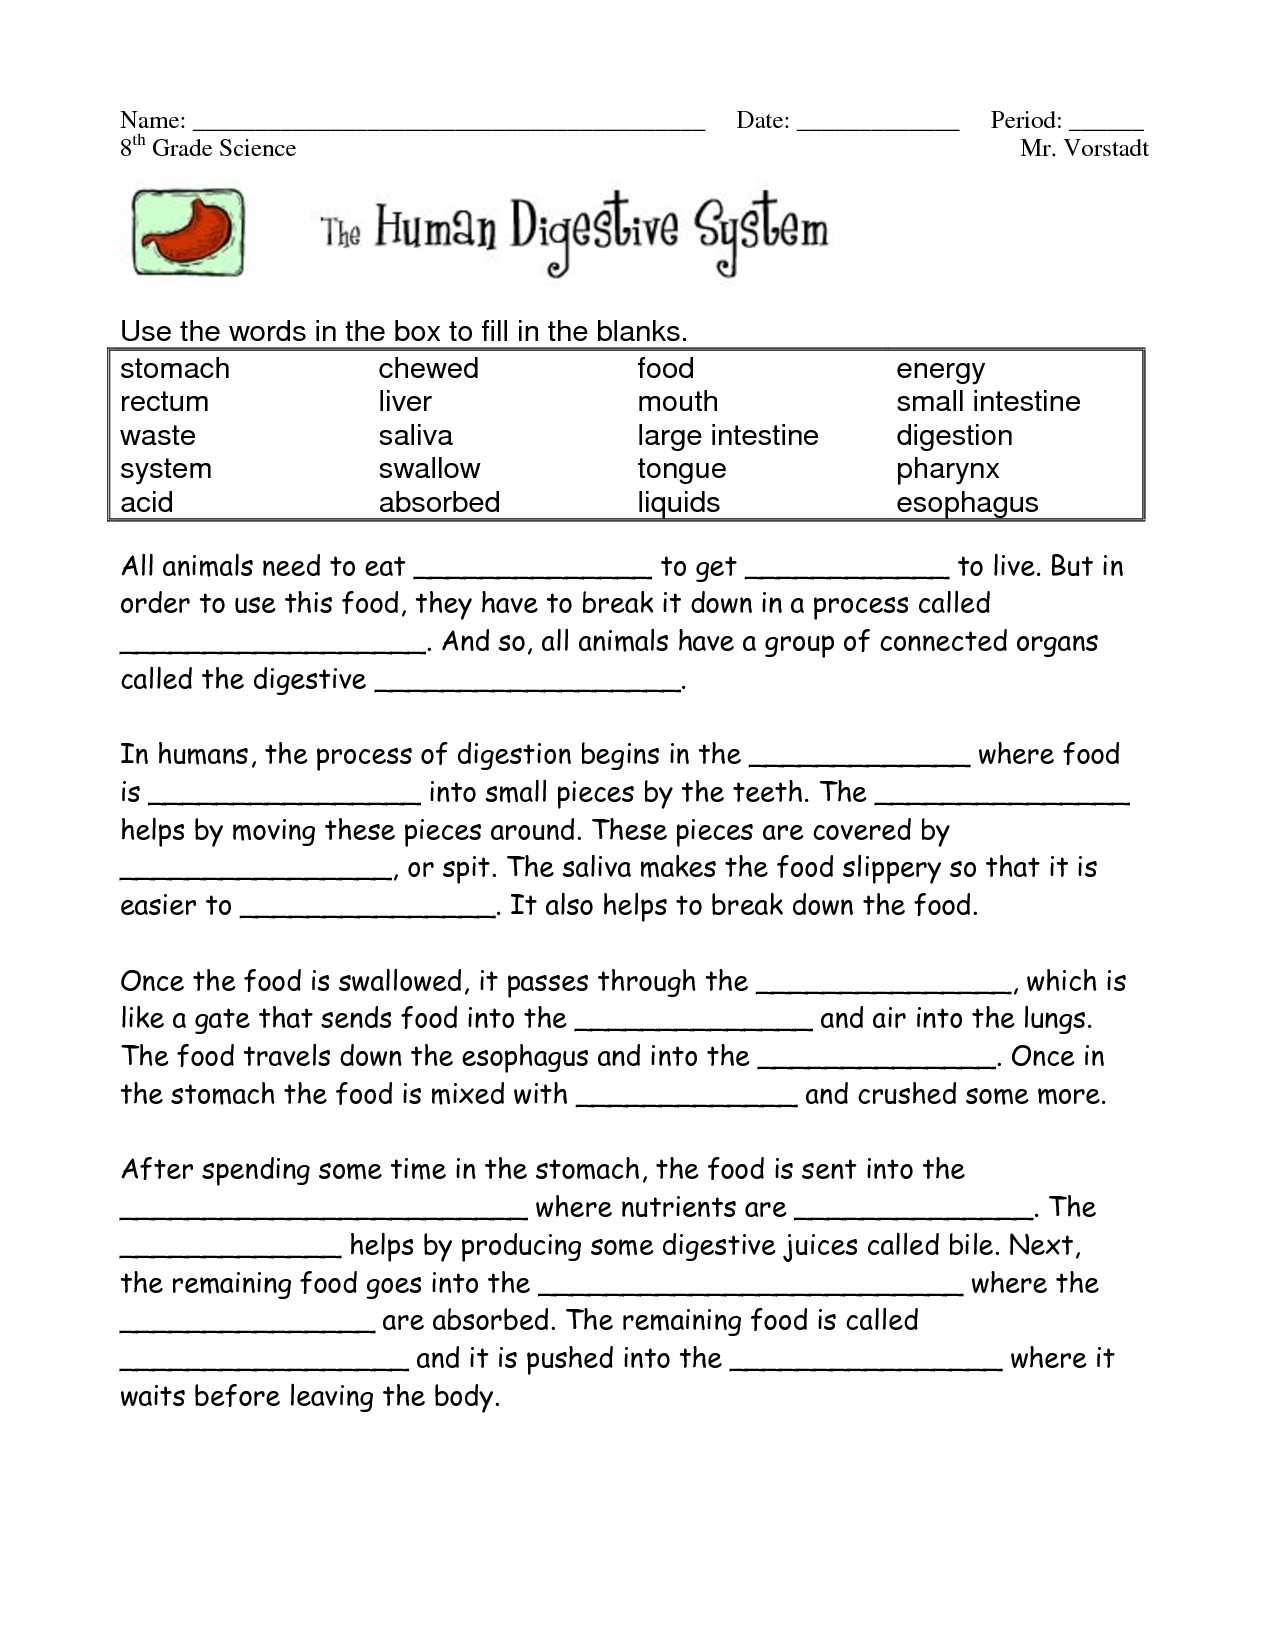 The Human Digestive Tract Worksheet Answers together with What Am I Science Worksheet Answers Fresh Food Digestion Worksheets